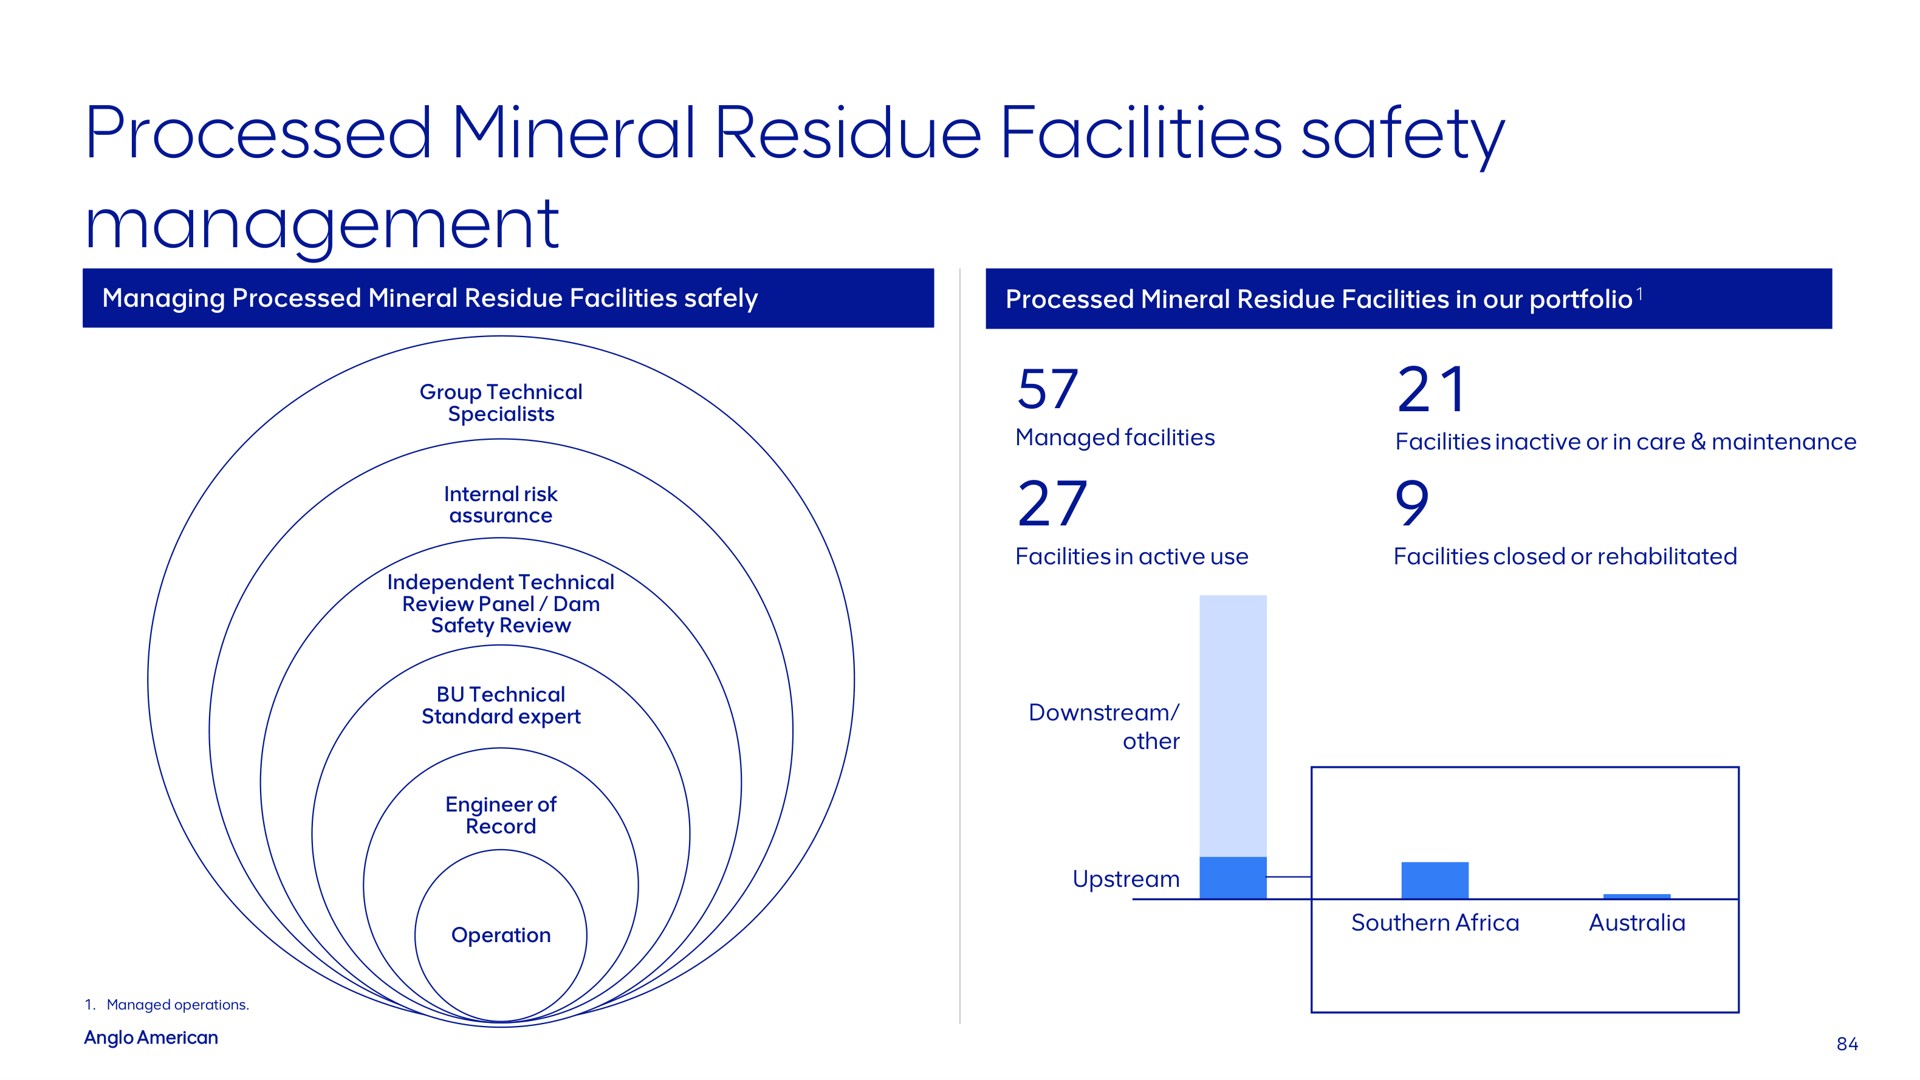 processed mineral residue facilities safety management | AngloAmerican